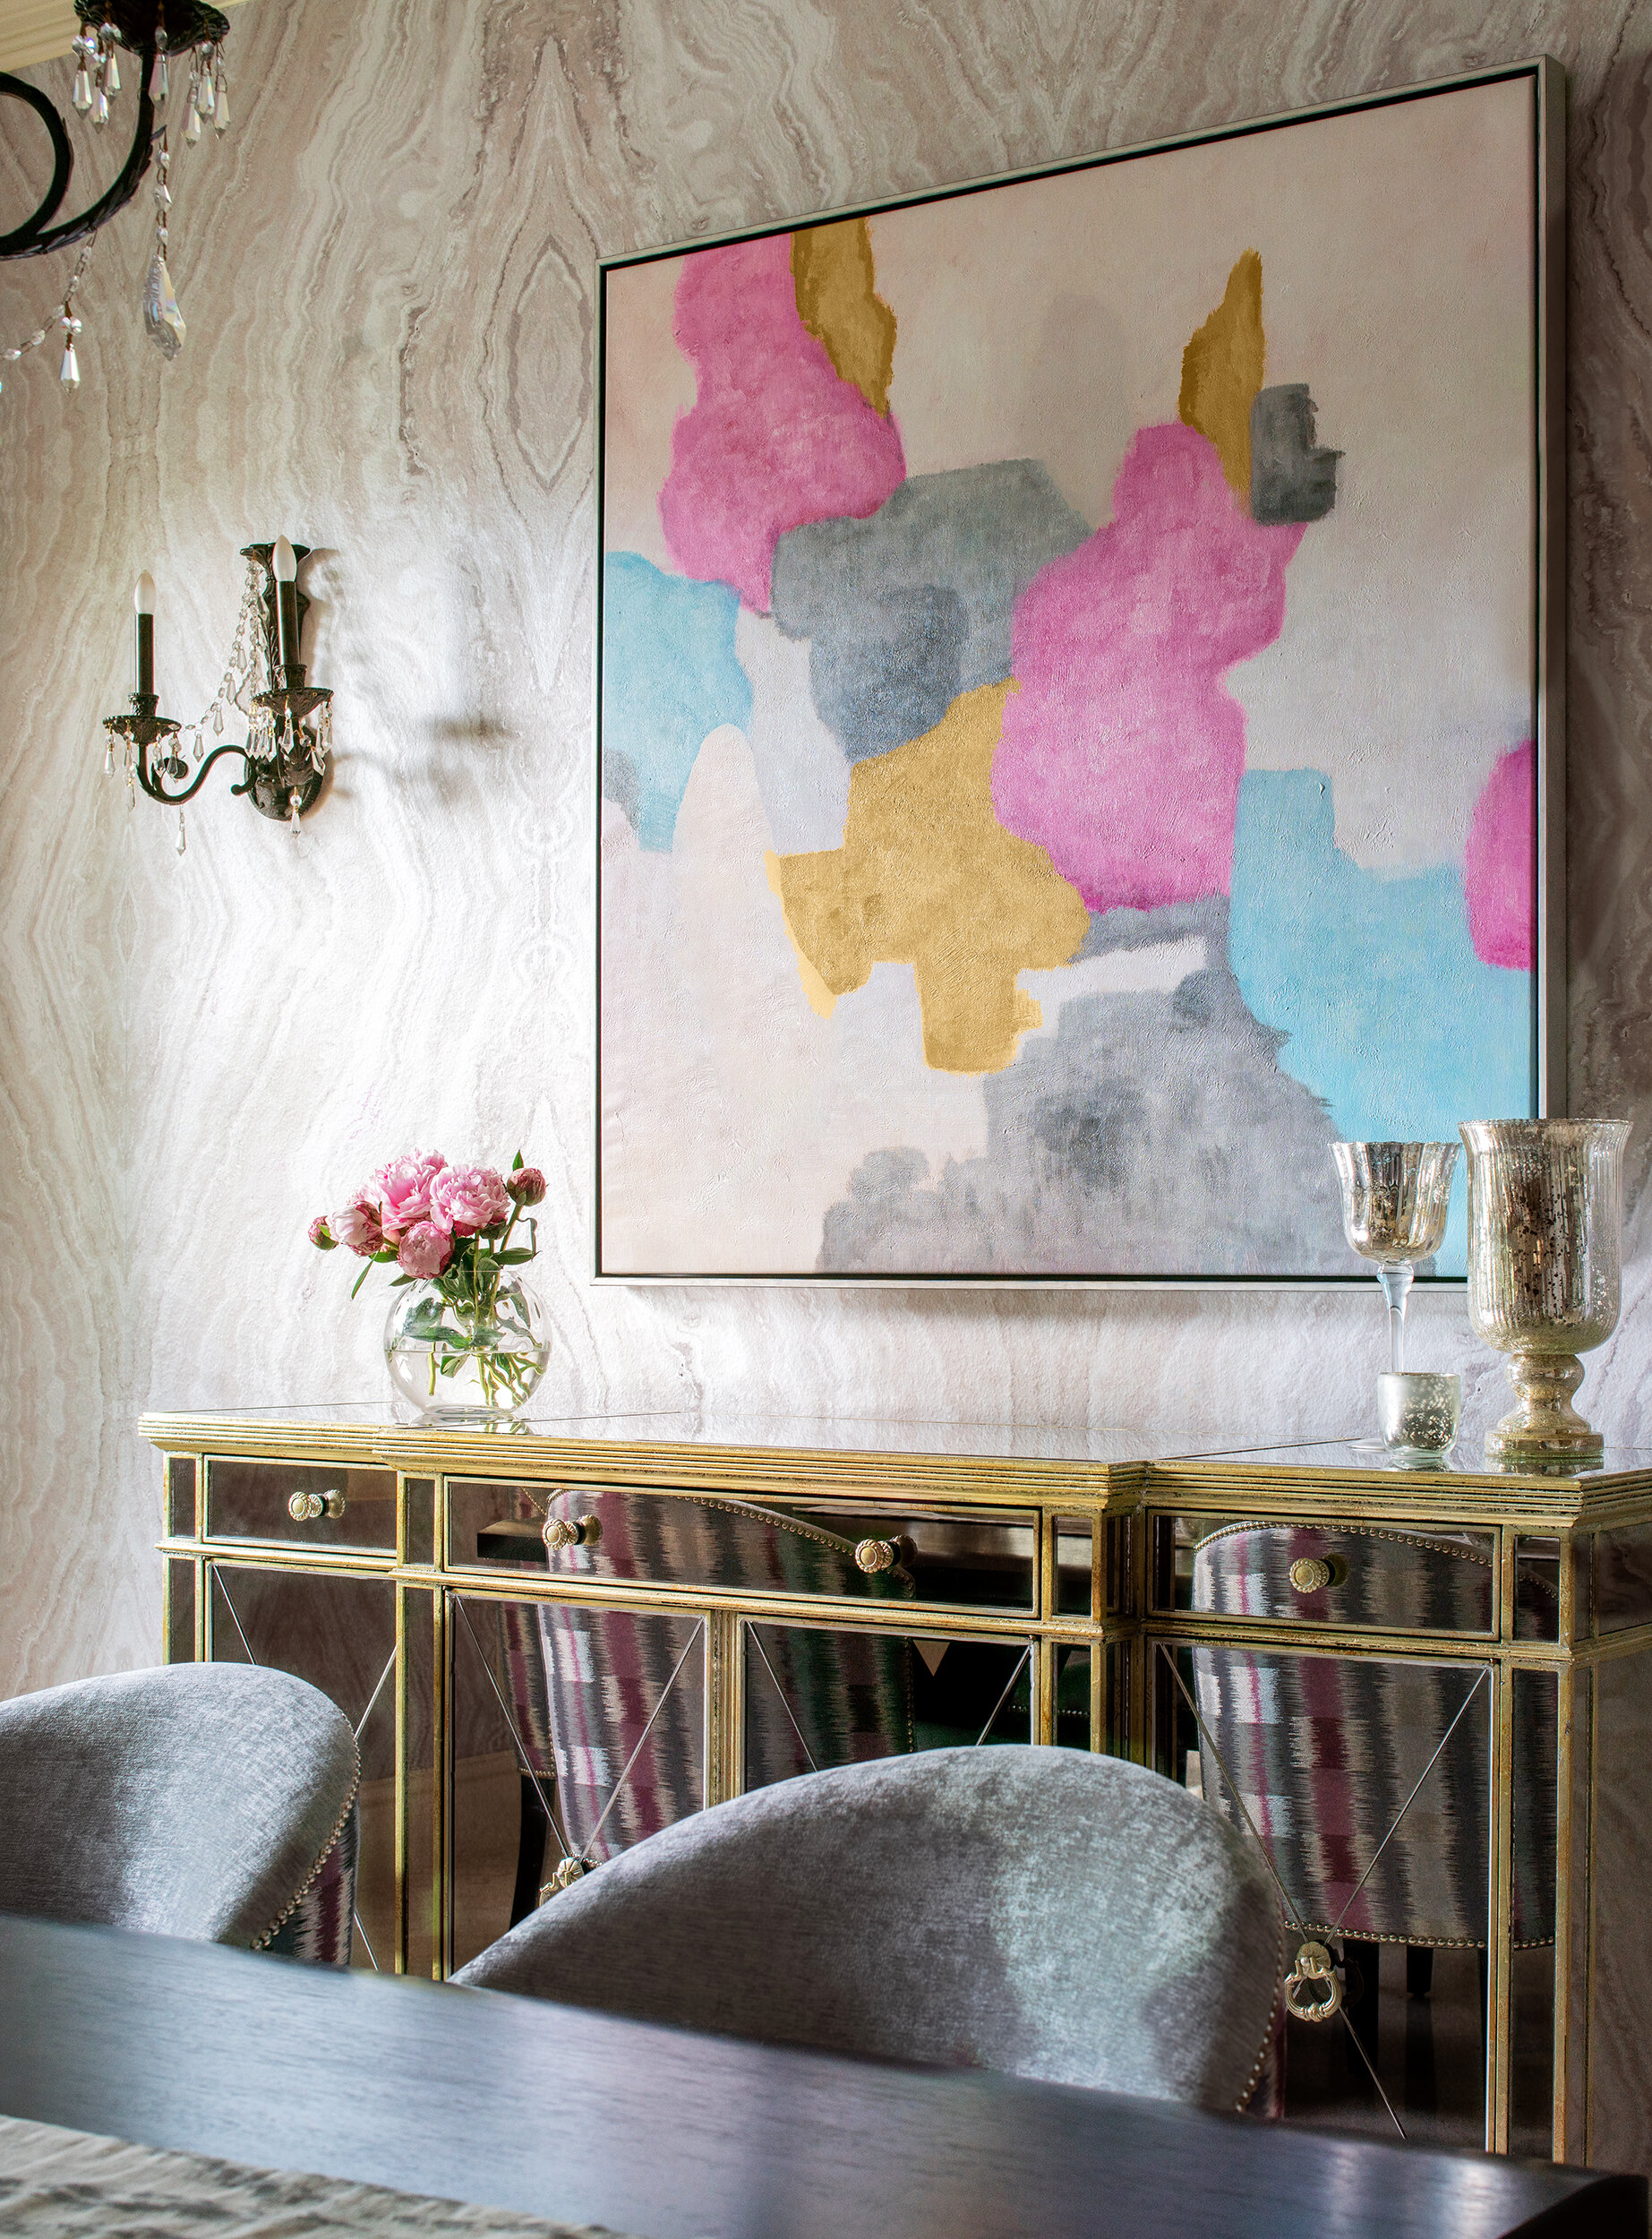 Abstract fun and color full painting in dining room